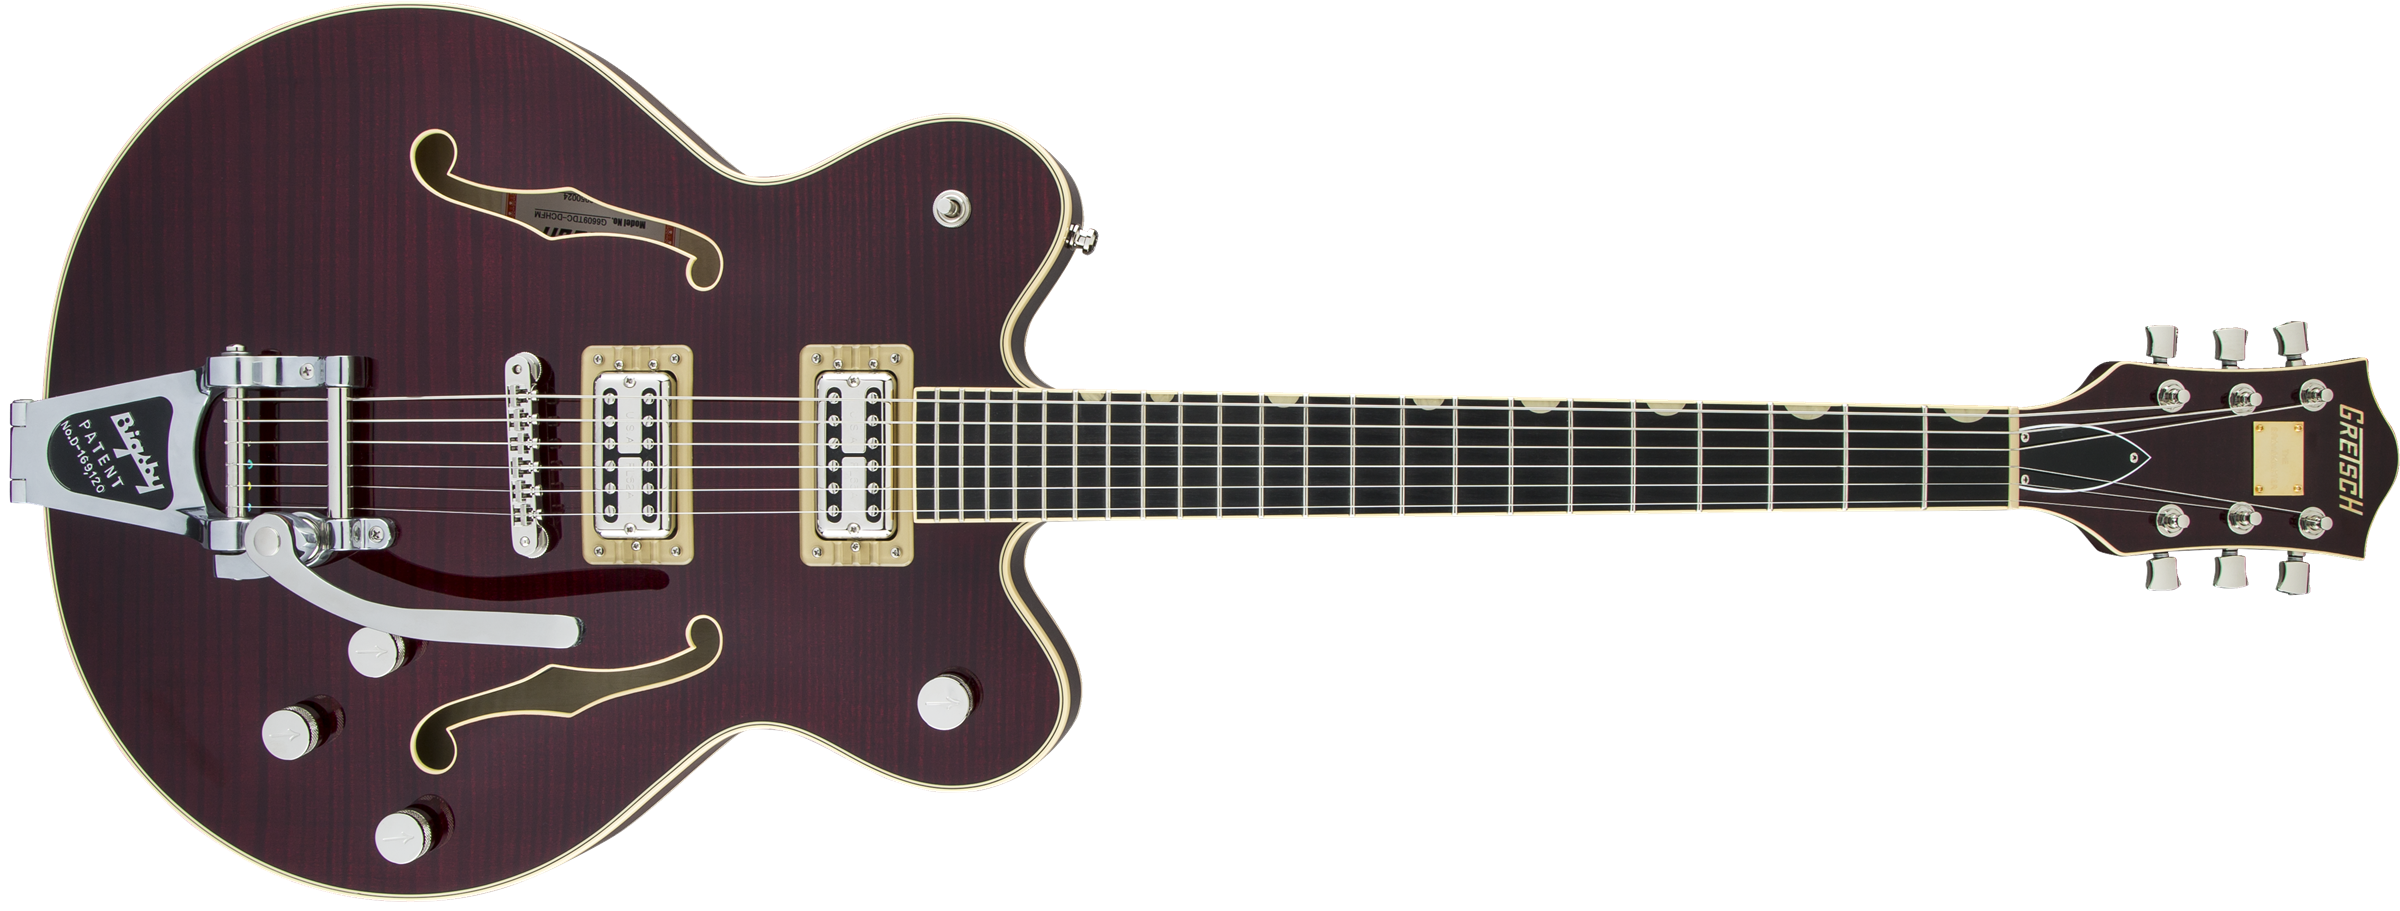 Gretsch G6609TFM Players Edition Broadkaster Center Block Electric Guitar - Dark Cherry Flame